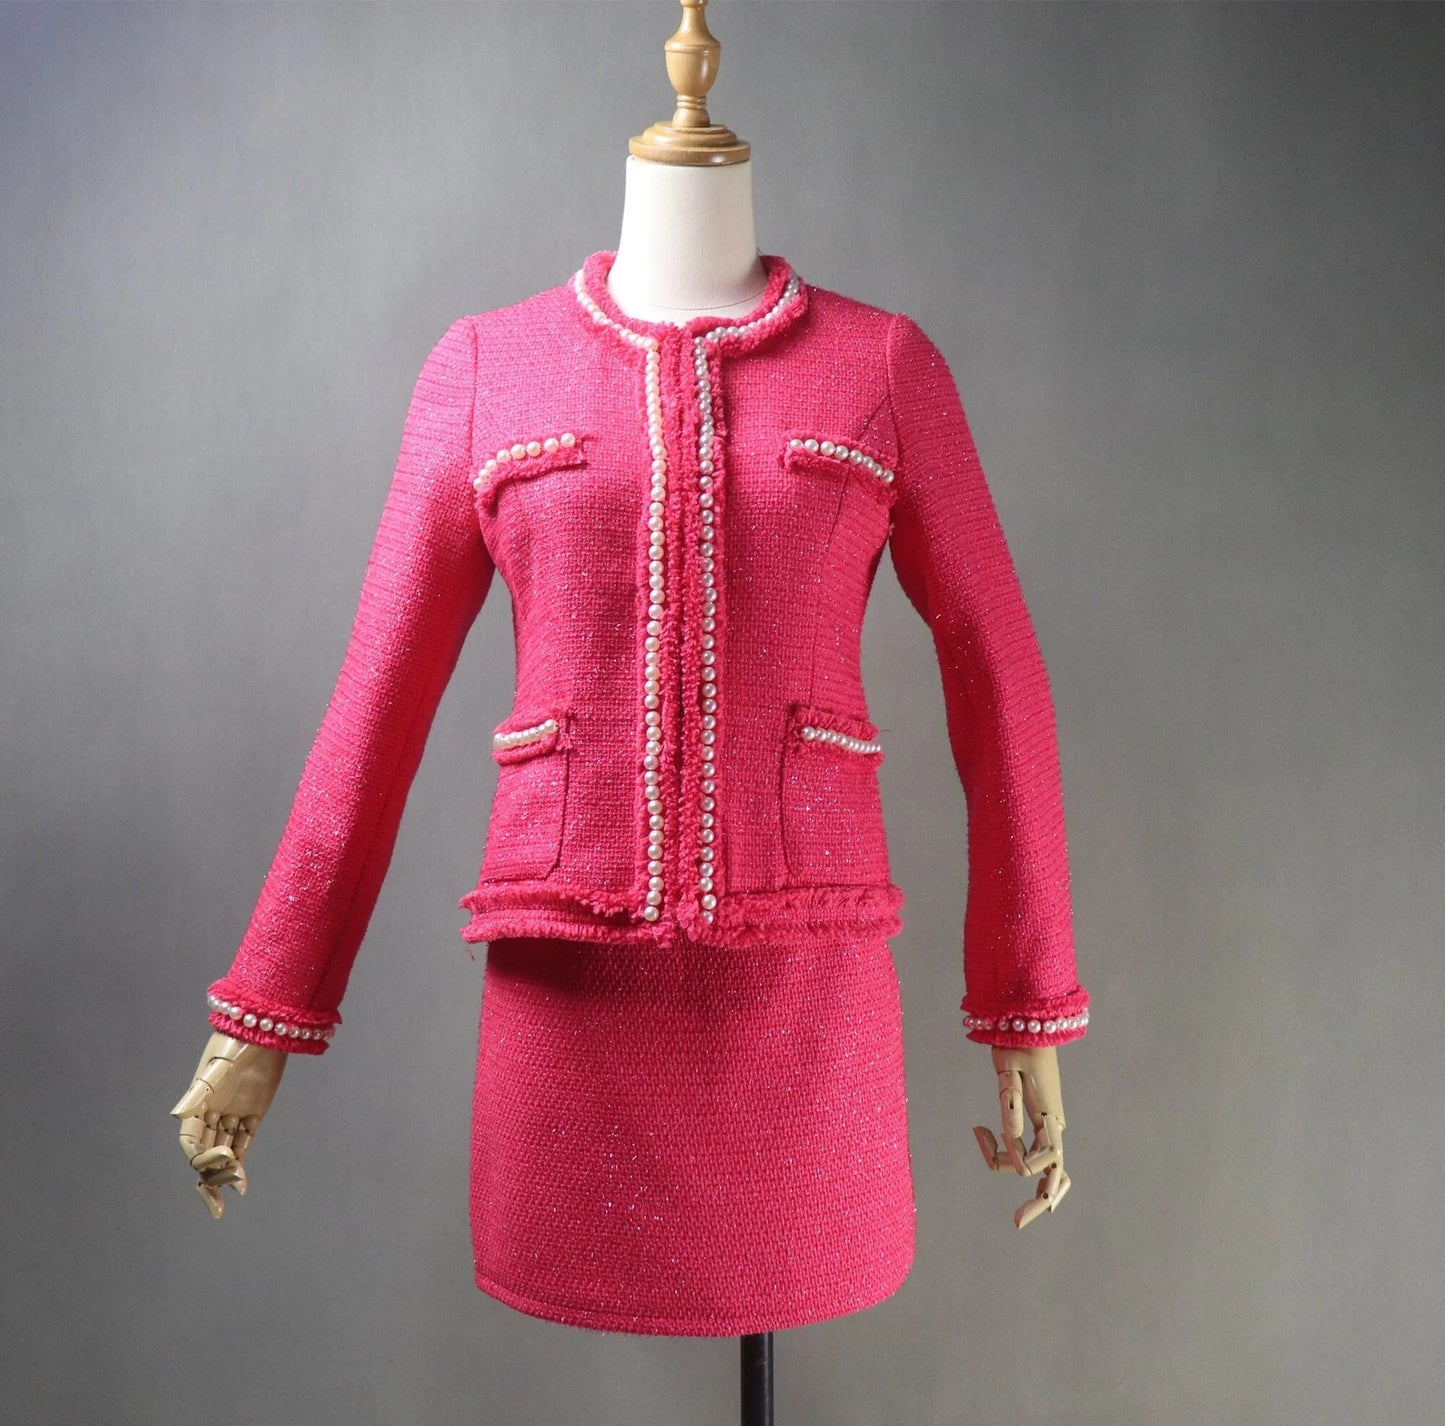 Women's HAND MADE Hot Pink Pearls Decoration Jacket Coat  Blazer+Shorts/Skirts/Trousers  UK CUSTOMER SERVICE!  Women's Tailor CUSTOM MADE Hot Pink Pearls Decoration Jacket Coat - We offer Blazer+ Shorts/Skirts/Trousers. Hot pink colour designed with pearl button. Front pocket with fully lined jacket and skirt. Can worn for college inauguration, party, events, wedding wear, outside Dinner, Friends party, Church wear and night out wear. Dry clean and no machine wash. 